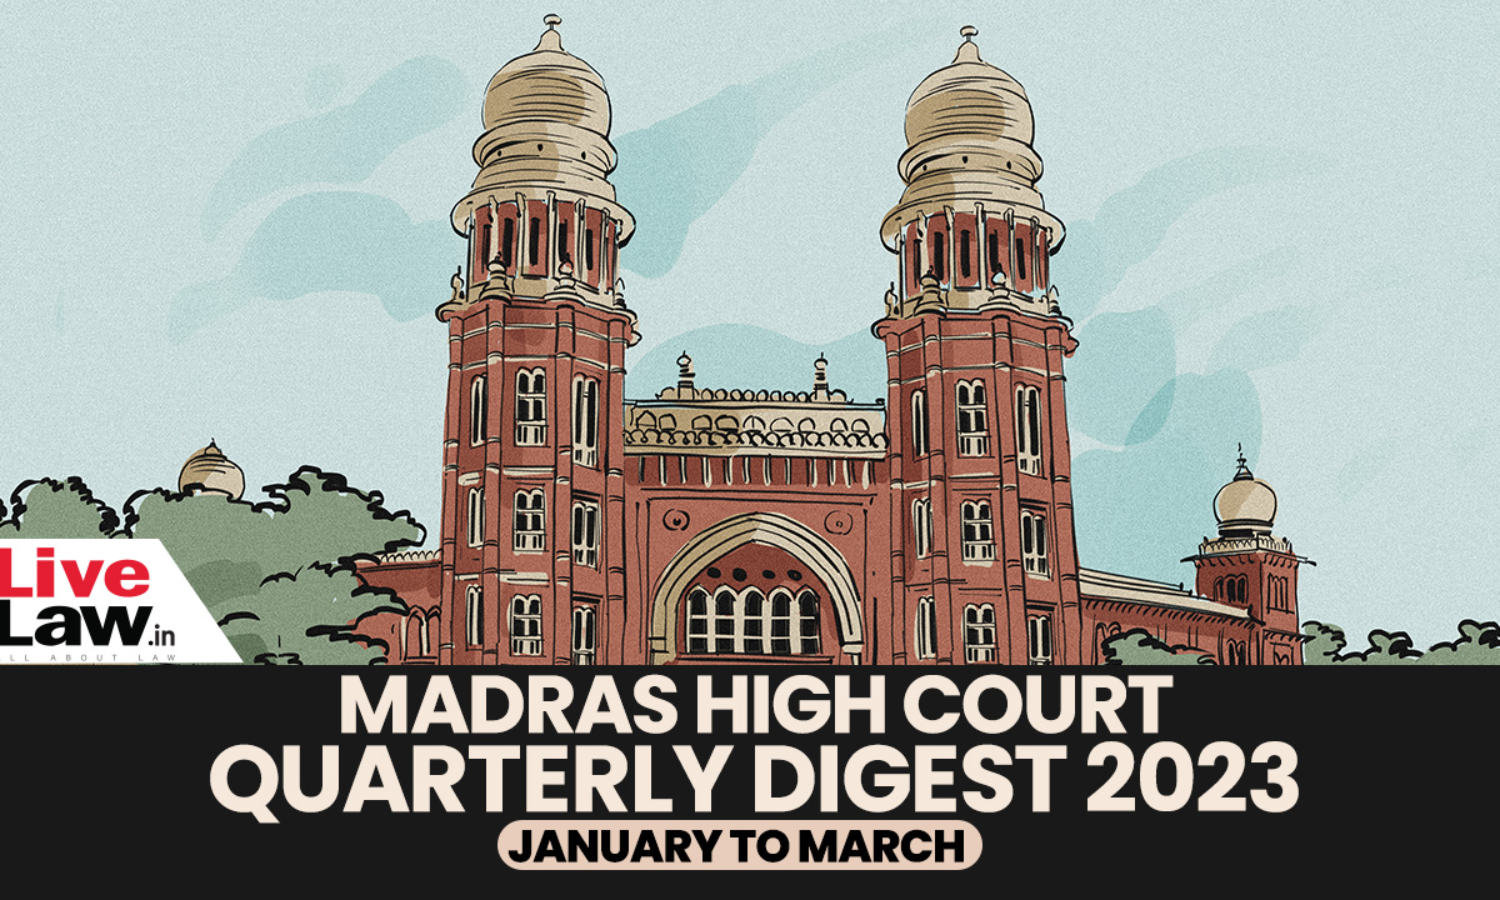 Centre approves appointment of five additional judges to Calcutta High Court,  1 to Madras High Court